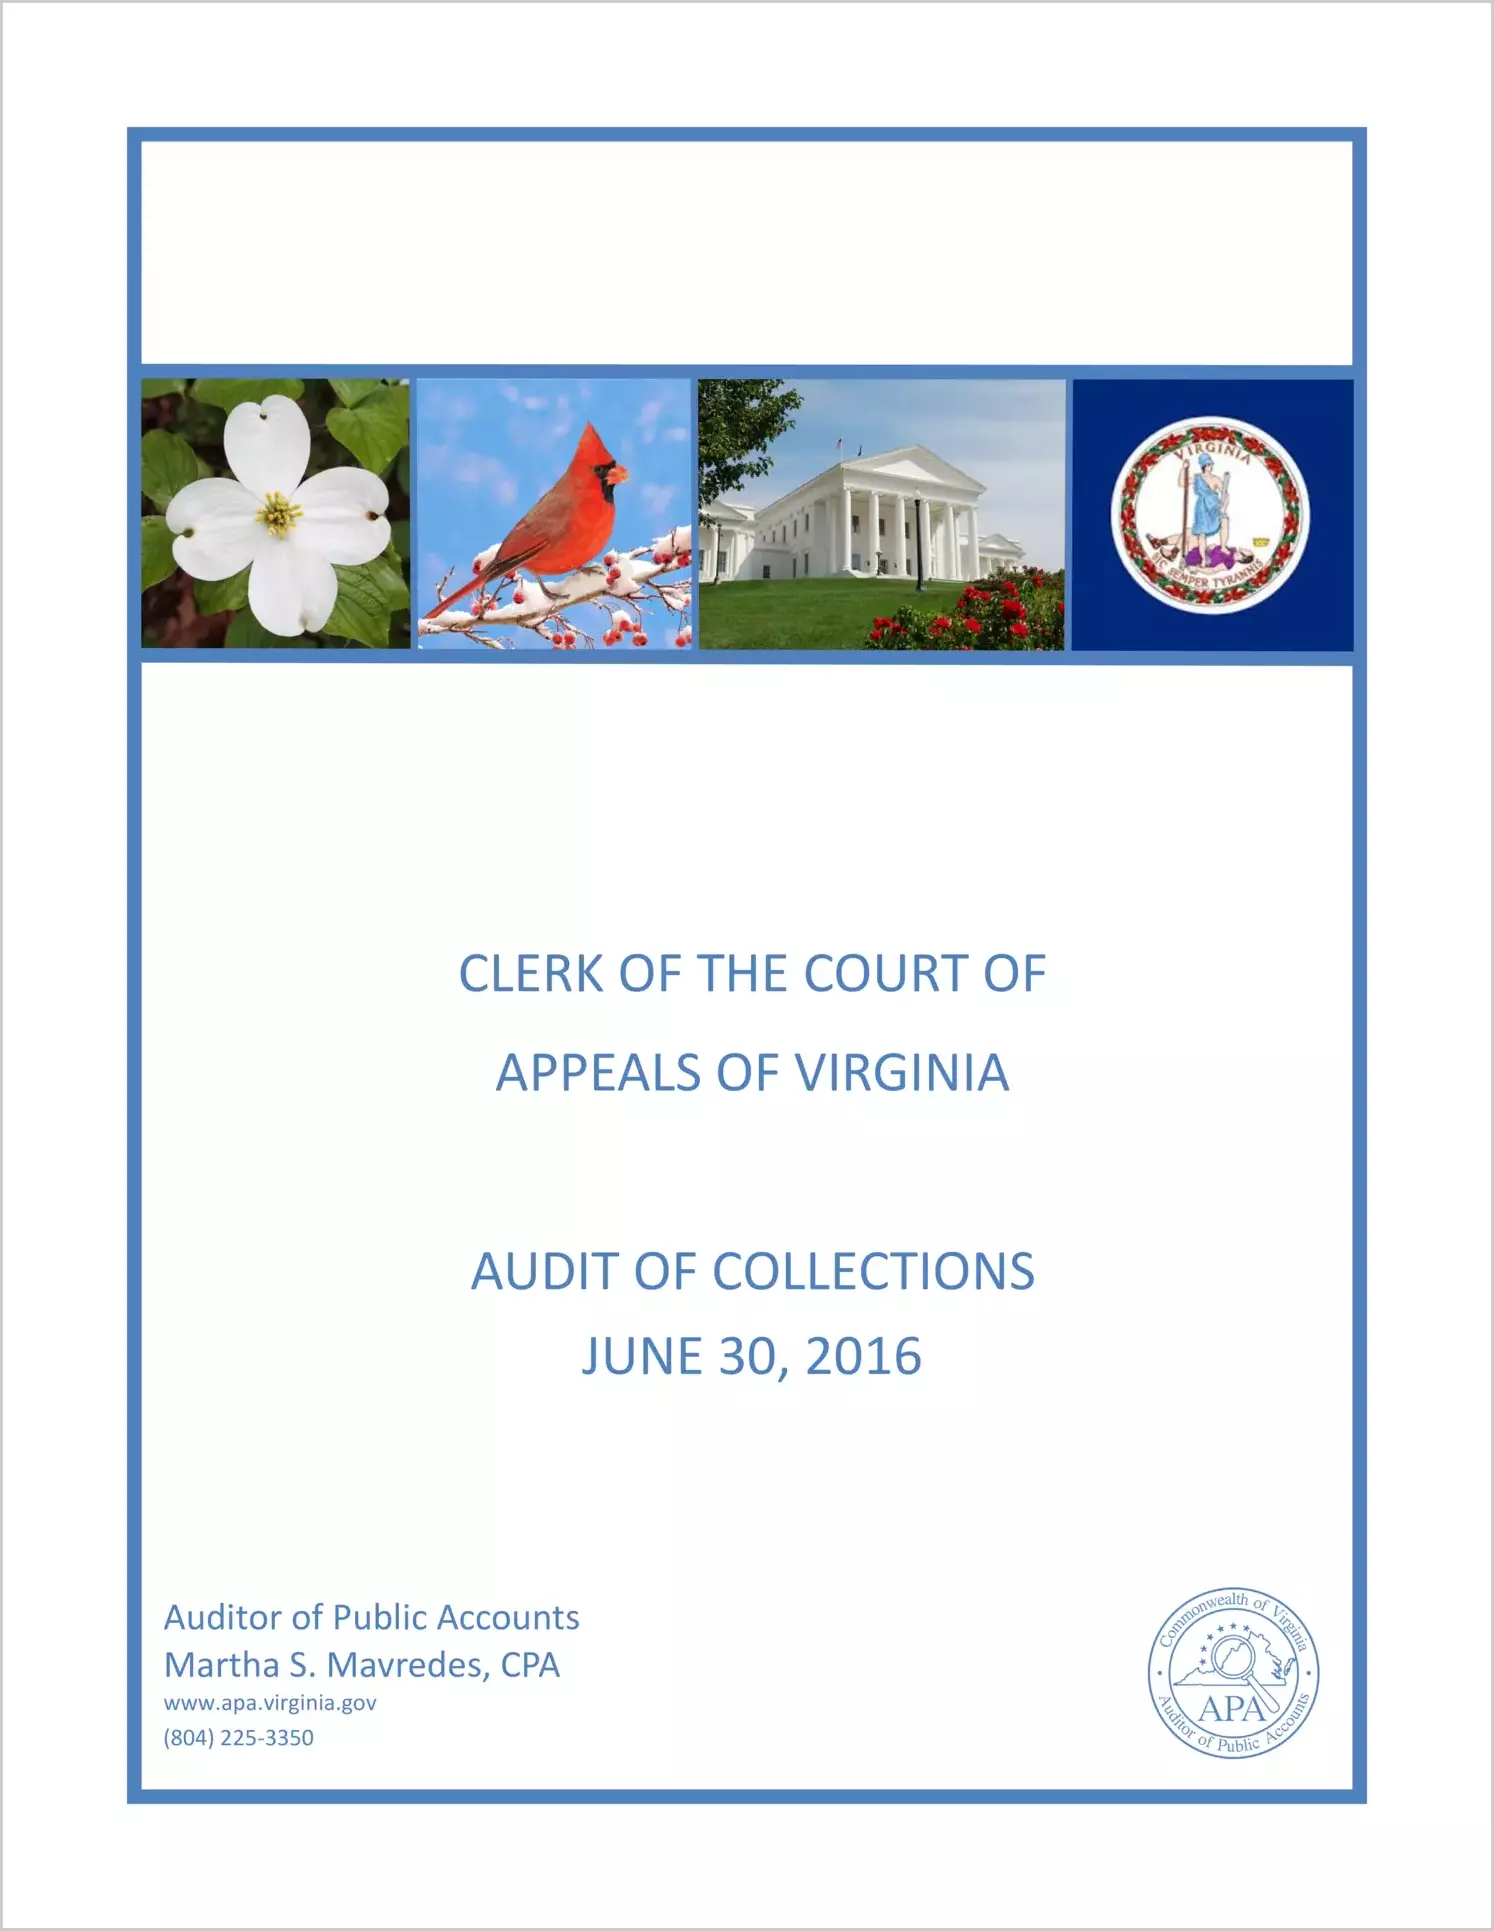 Clerk of the Court of Appeals of Virginia audit of Collections for the year ended June 30, 2016